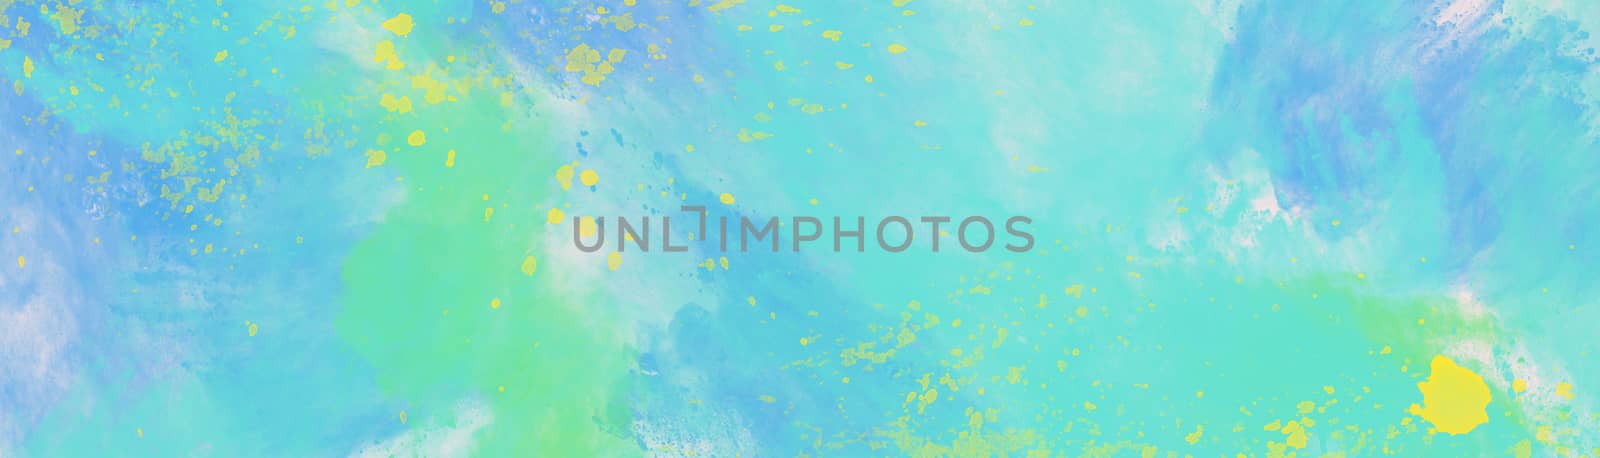 Abstract image of color powder in yellow and blue shades, digital illustration